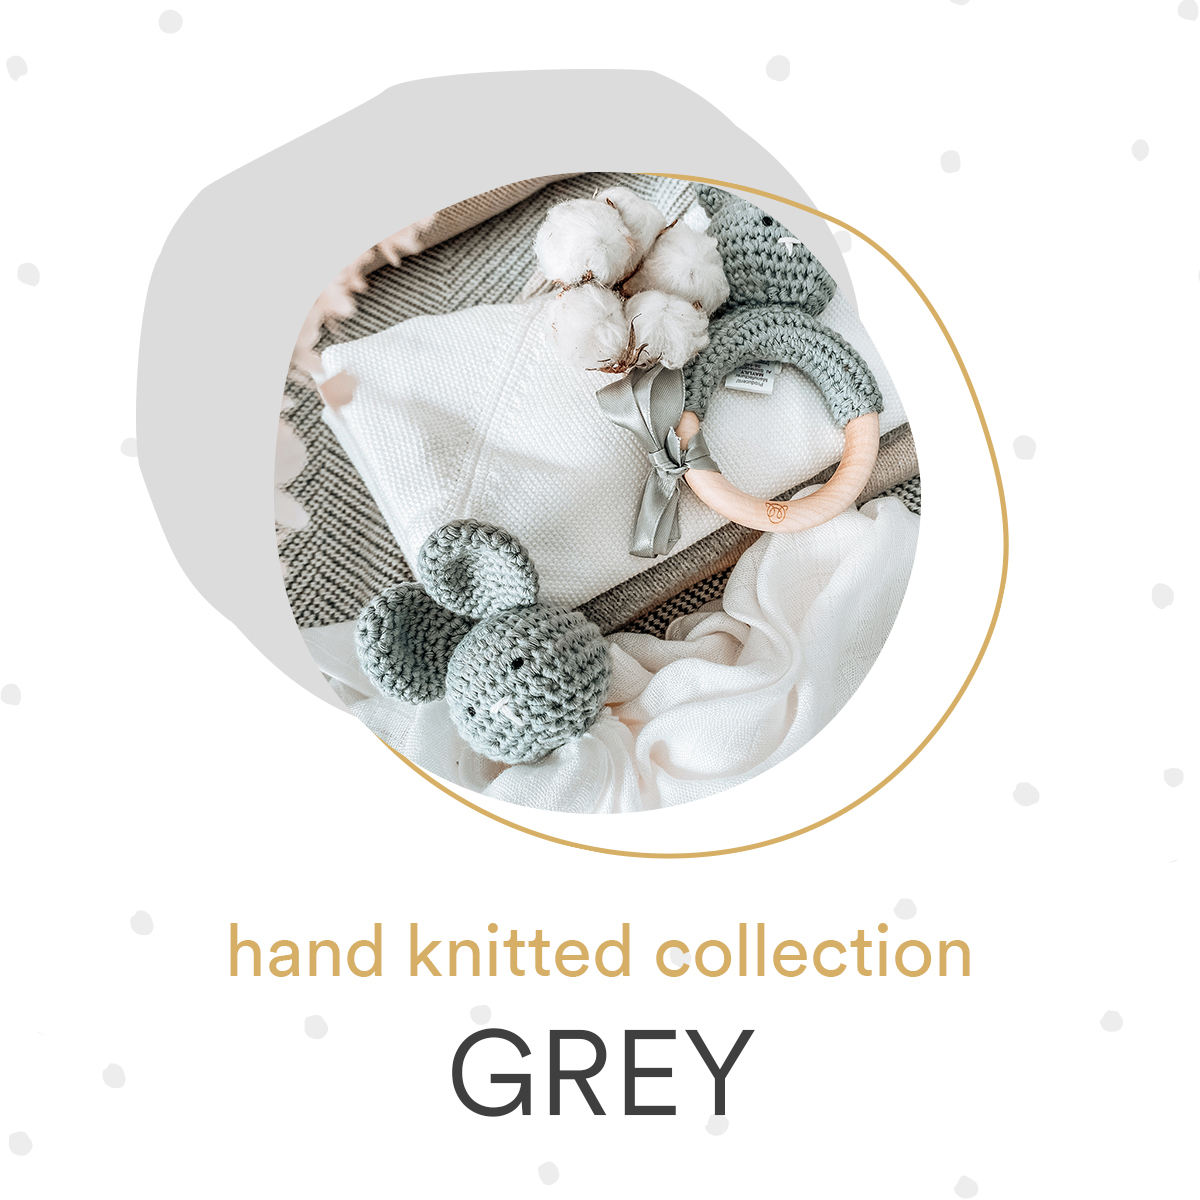 Hand knitted collection - Grey